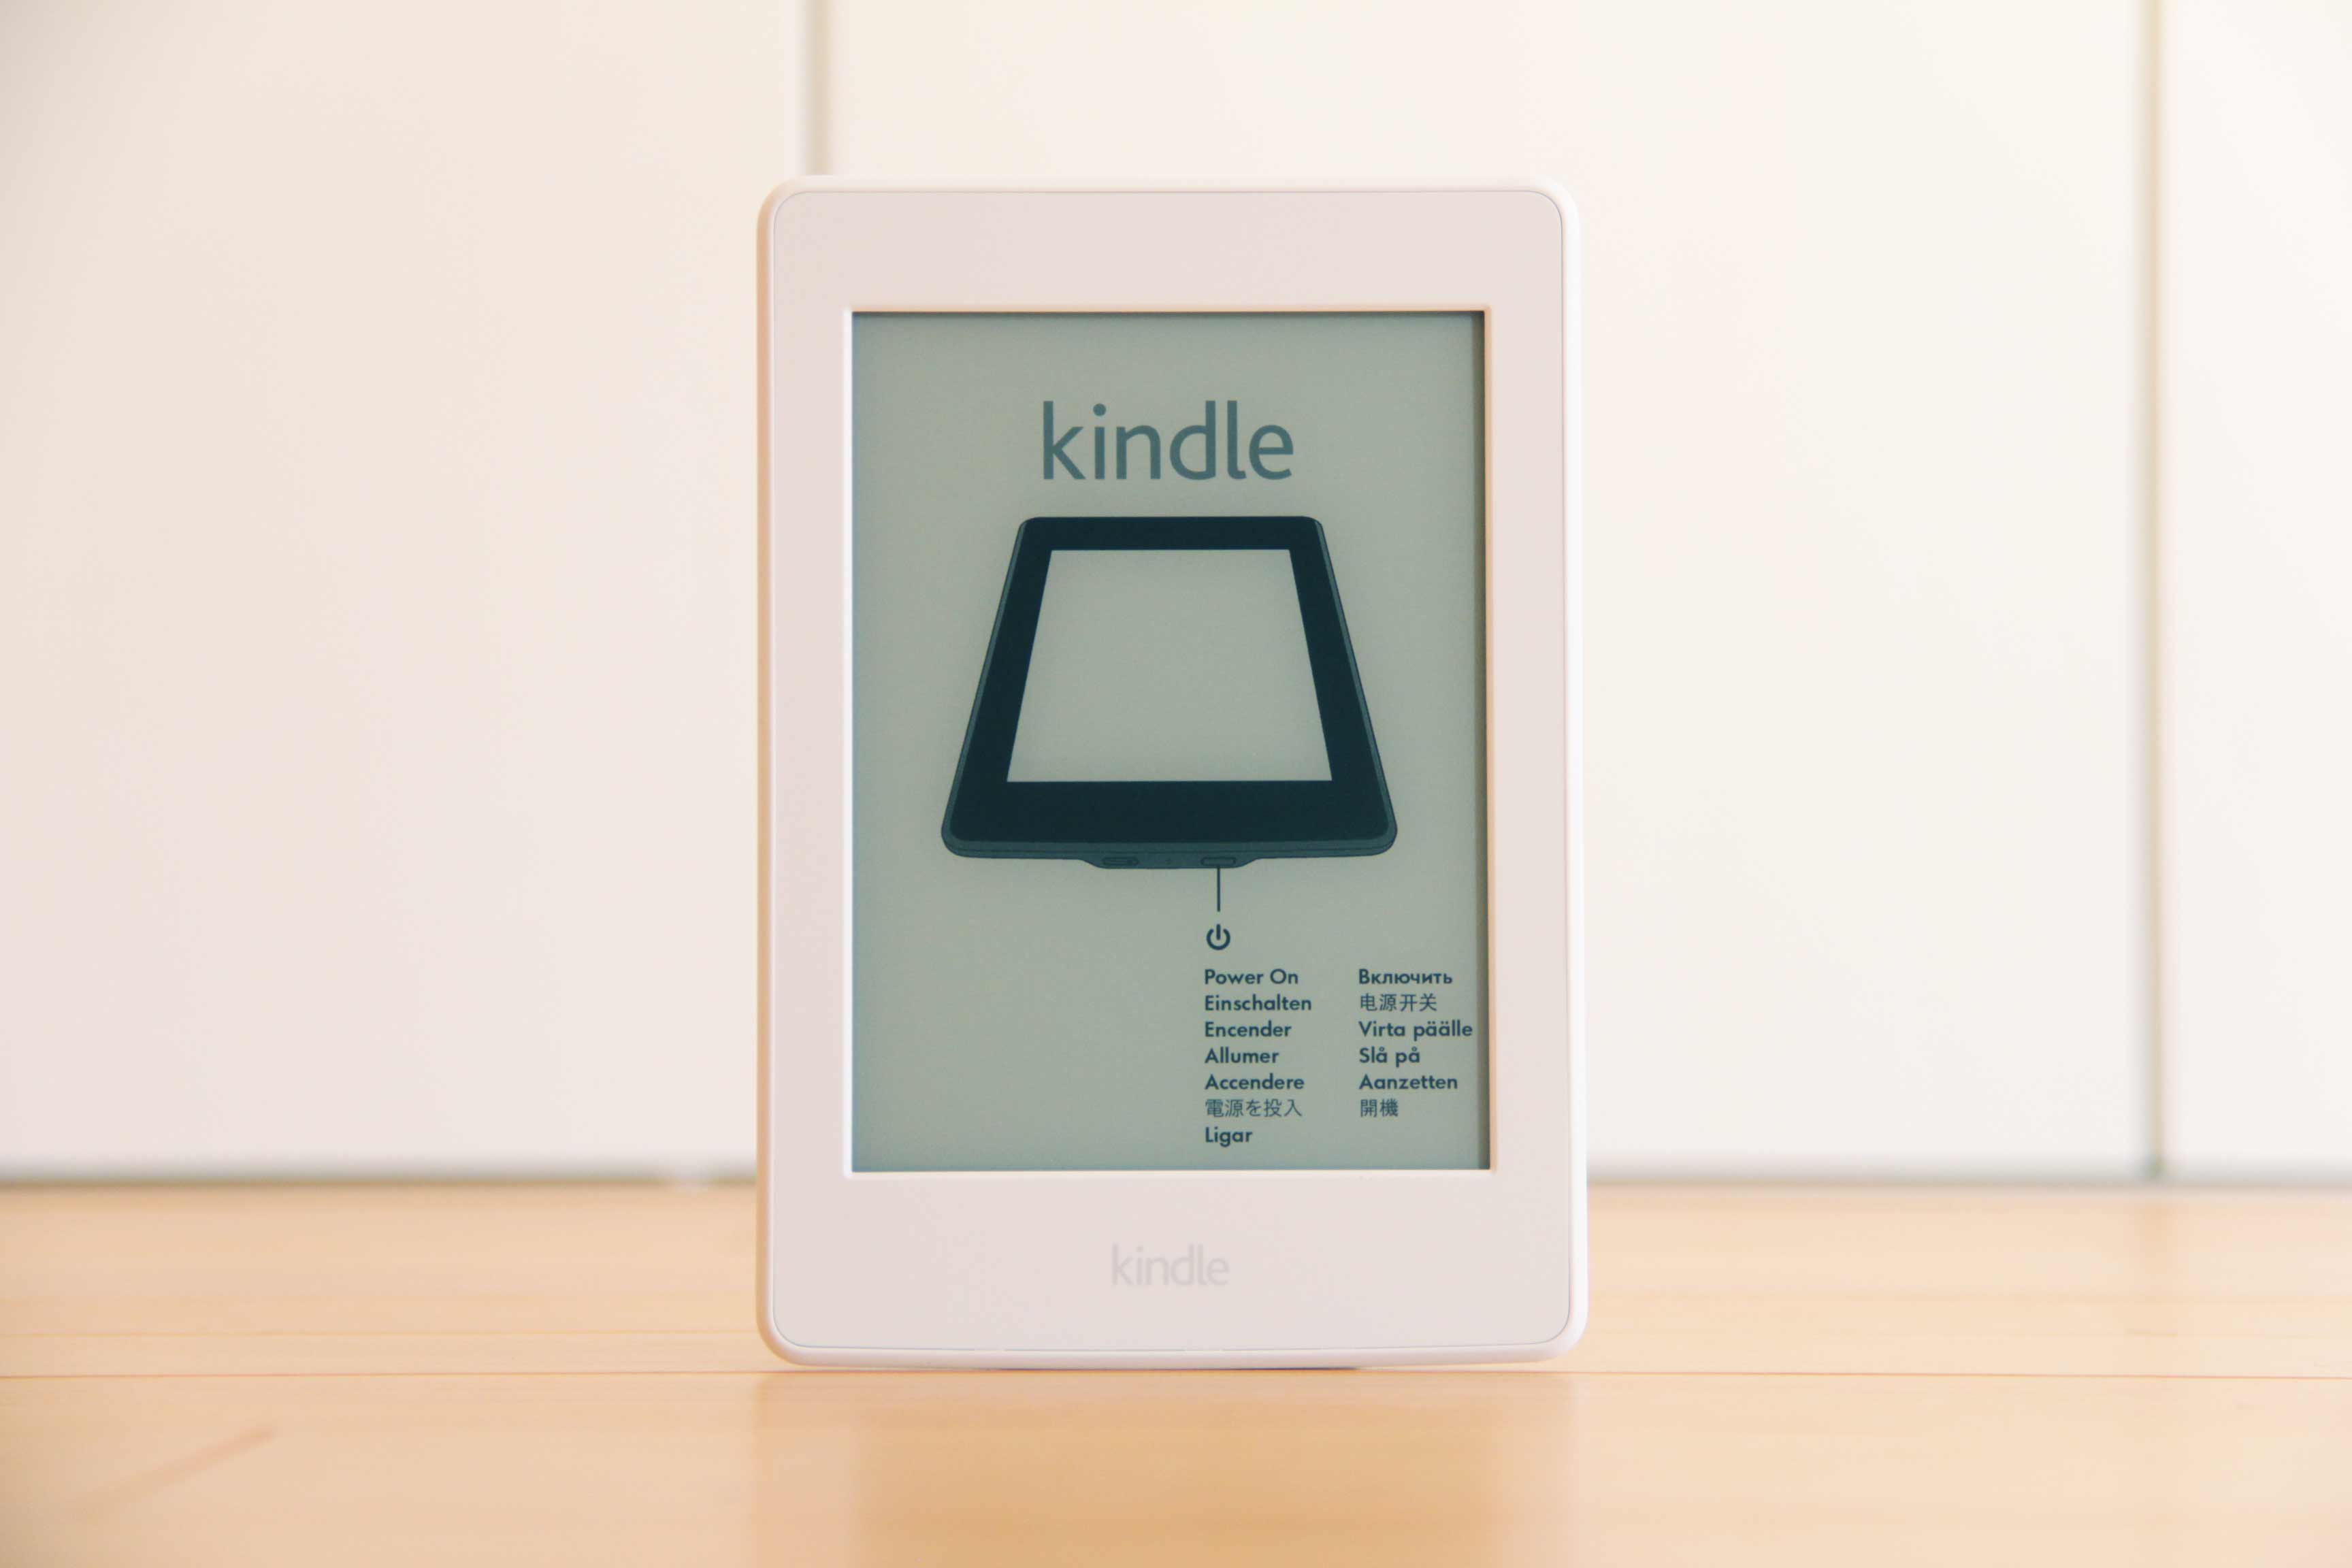 Kindle Paperwhiteの超基本的な5つの使い方と3つの応用ガイド編